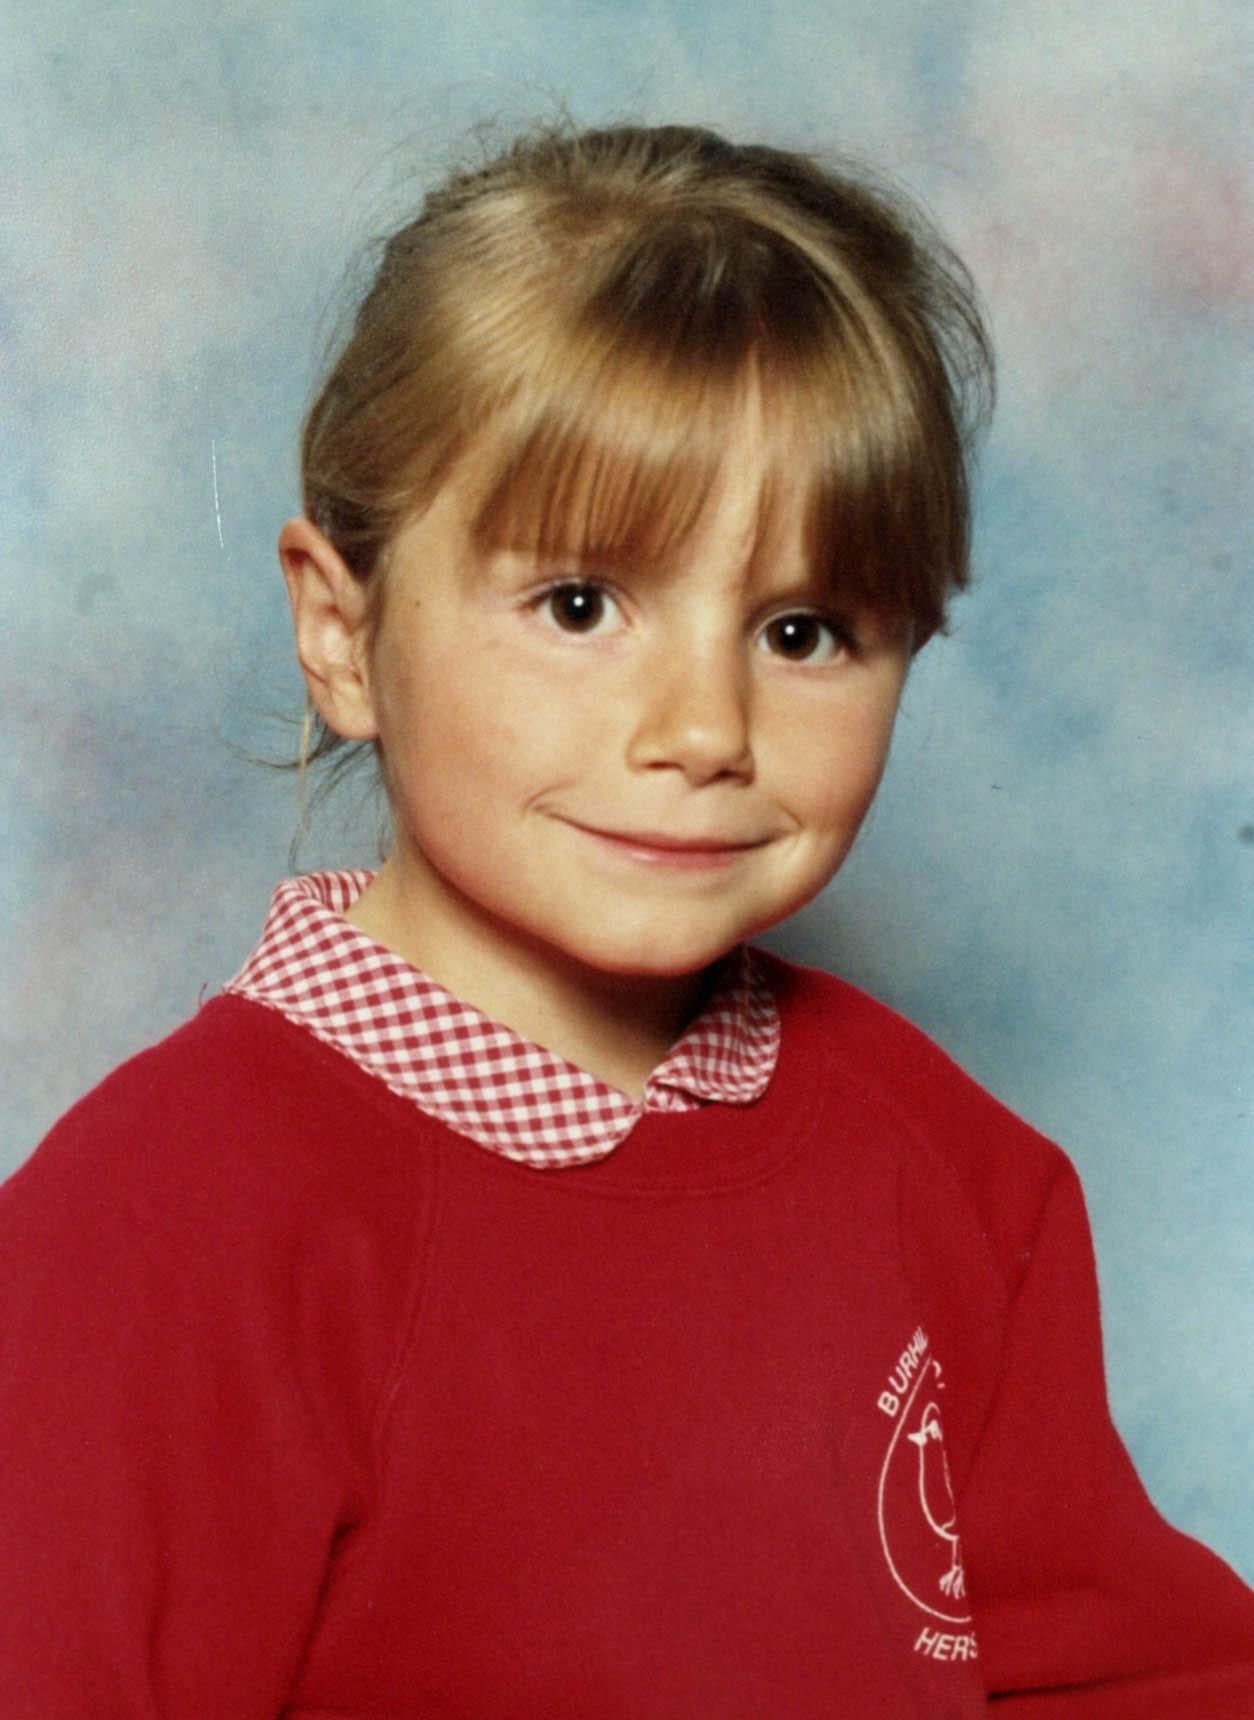 Sarah Payne, 8, from West Sussex who was murdered by Roy Whiting